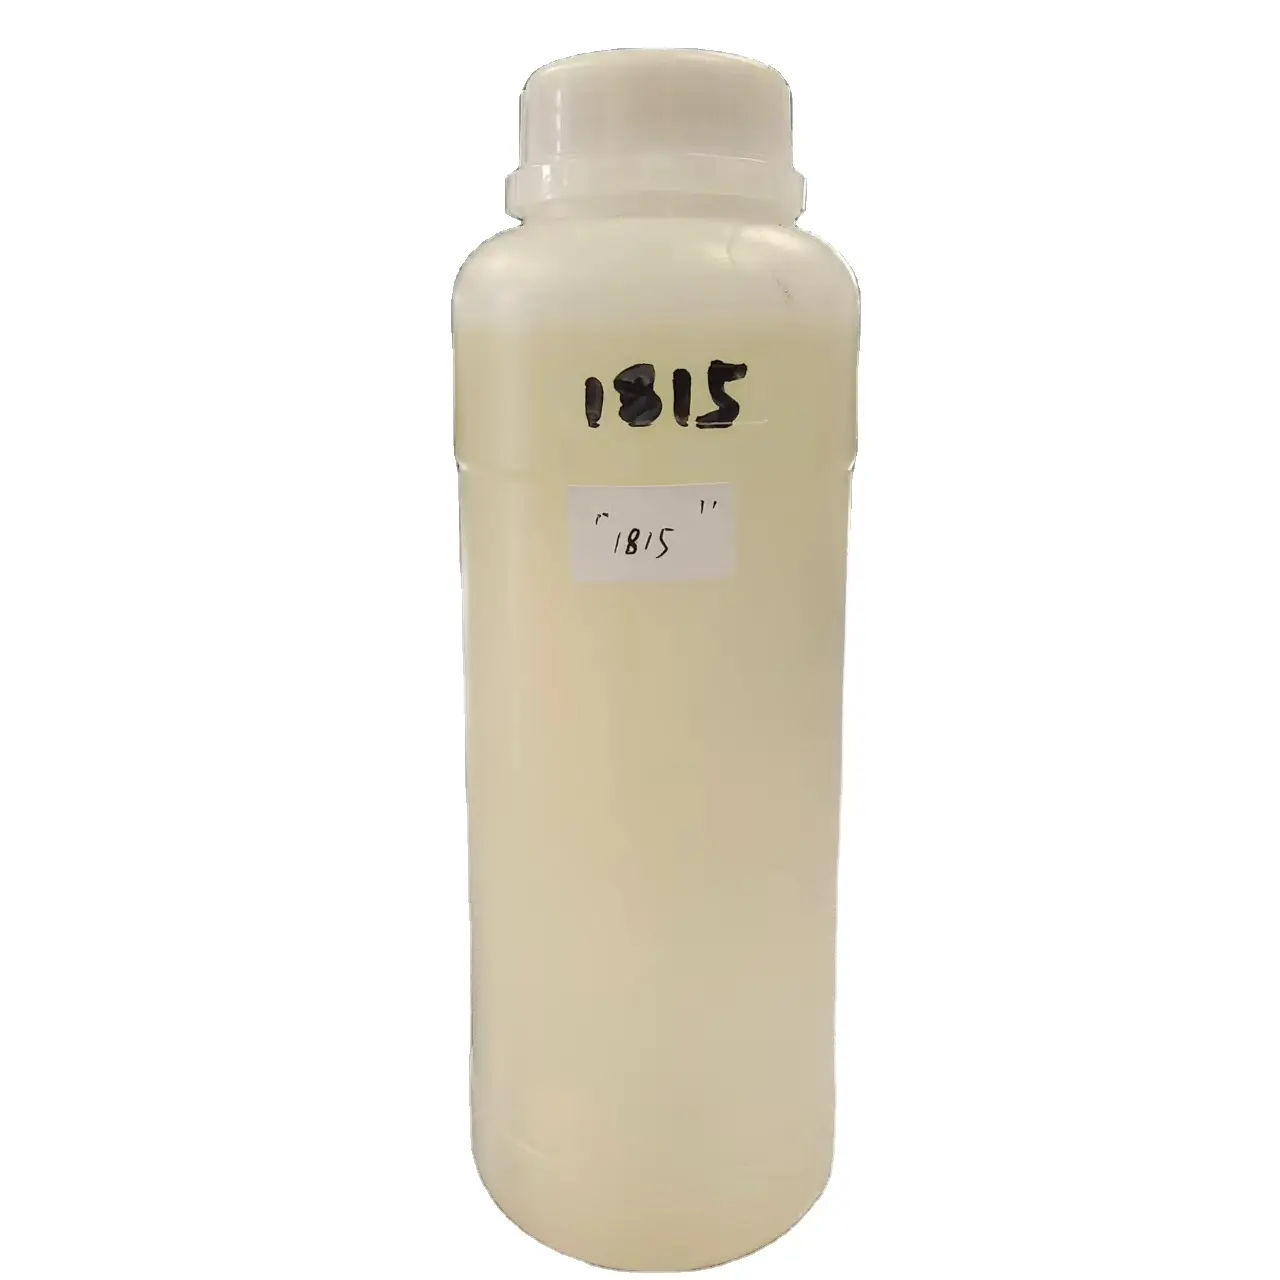 Chinese Supplier Modified Cycloaliphatic Amine Epoxy Curing Agent 1815 With Good UV Resistance Used For Epoxy Floor